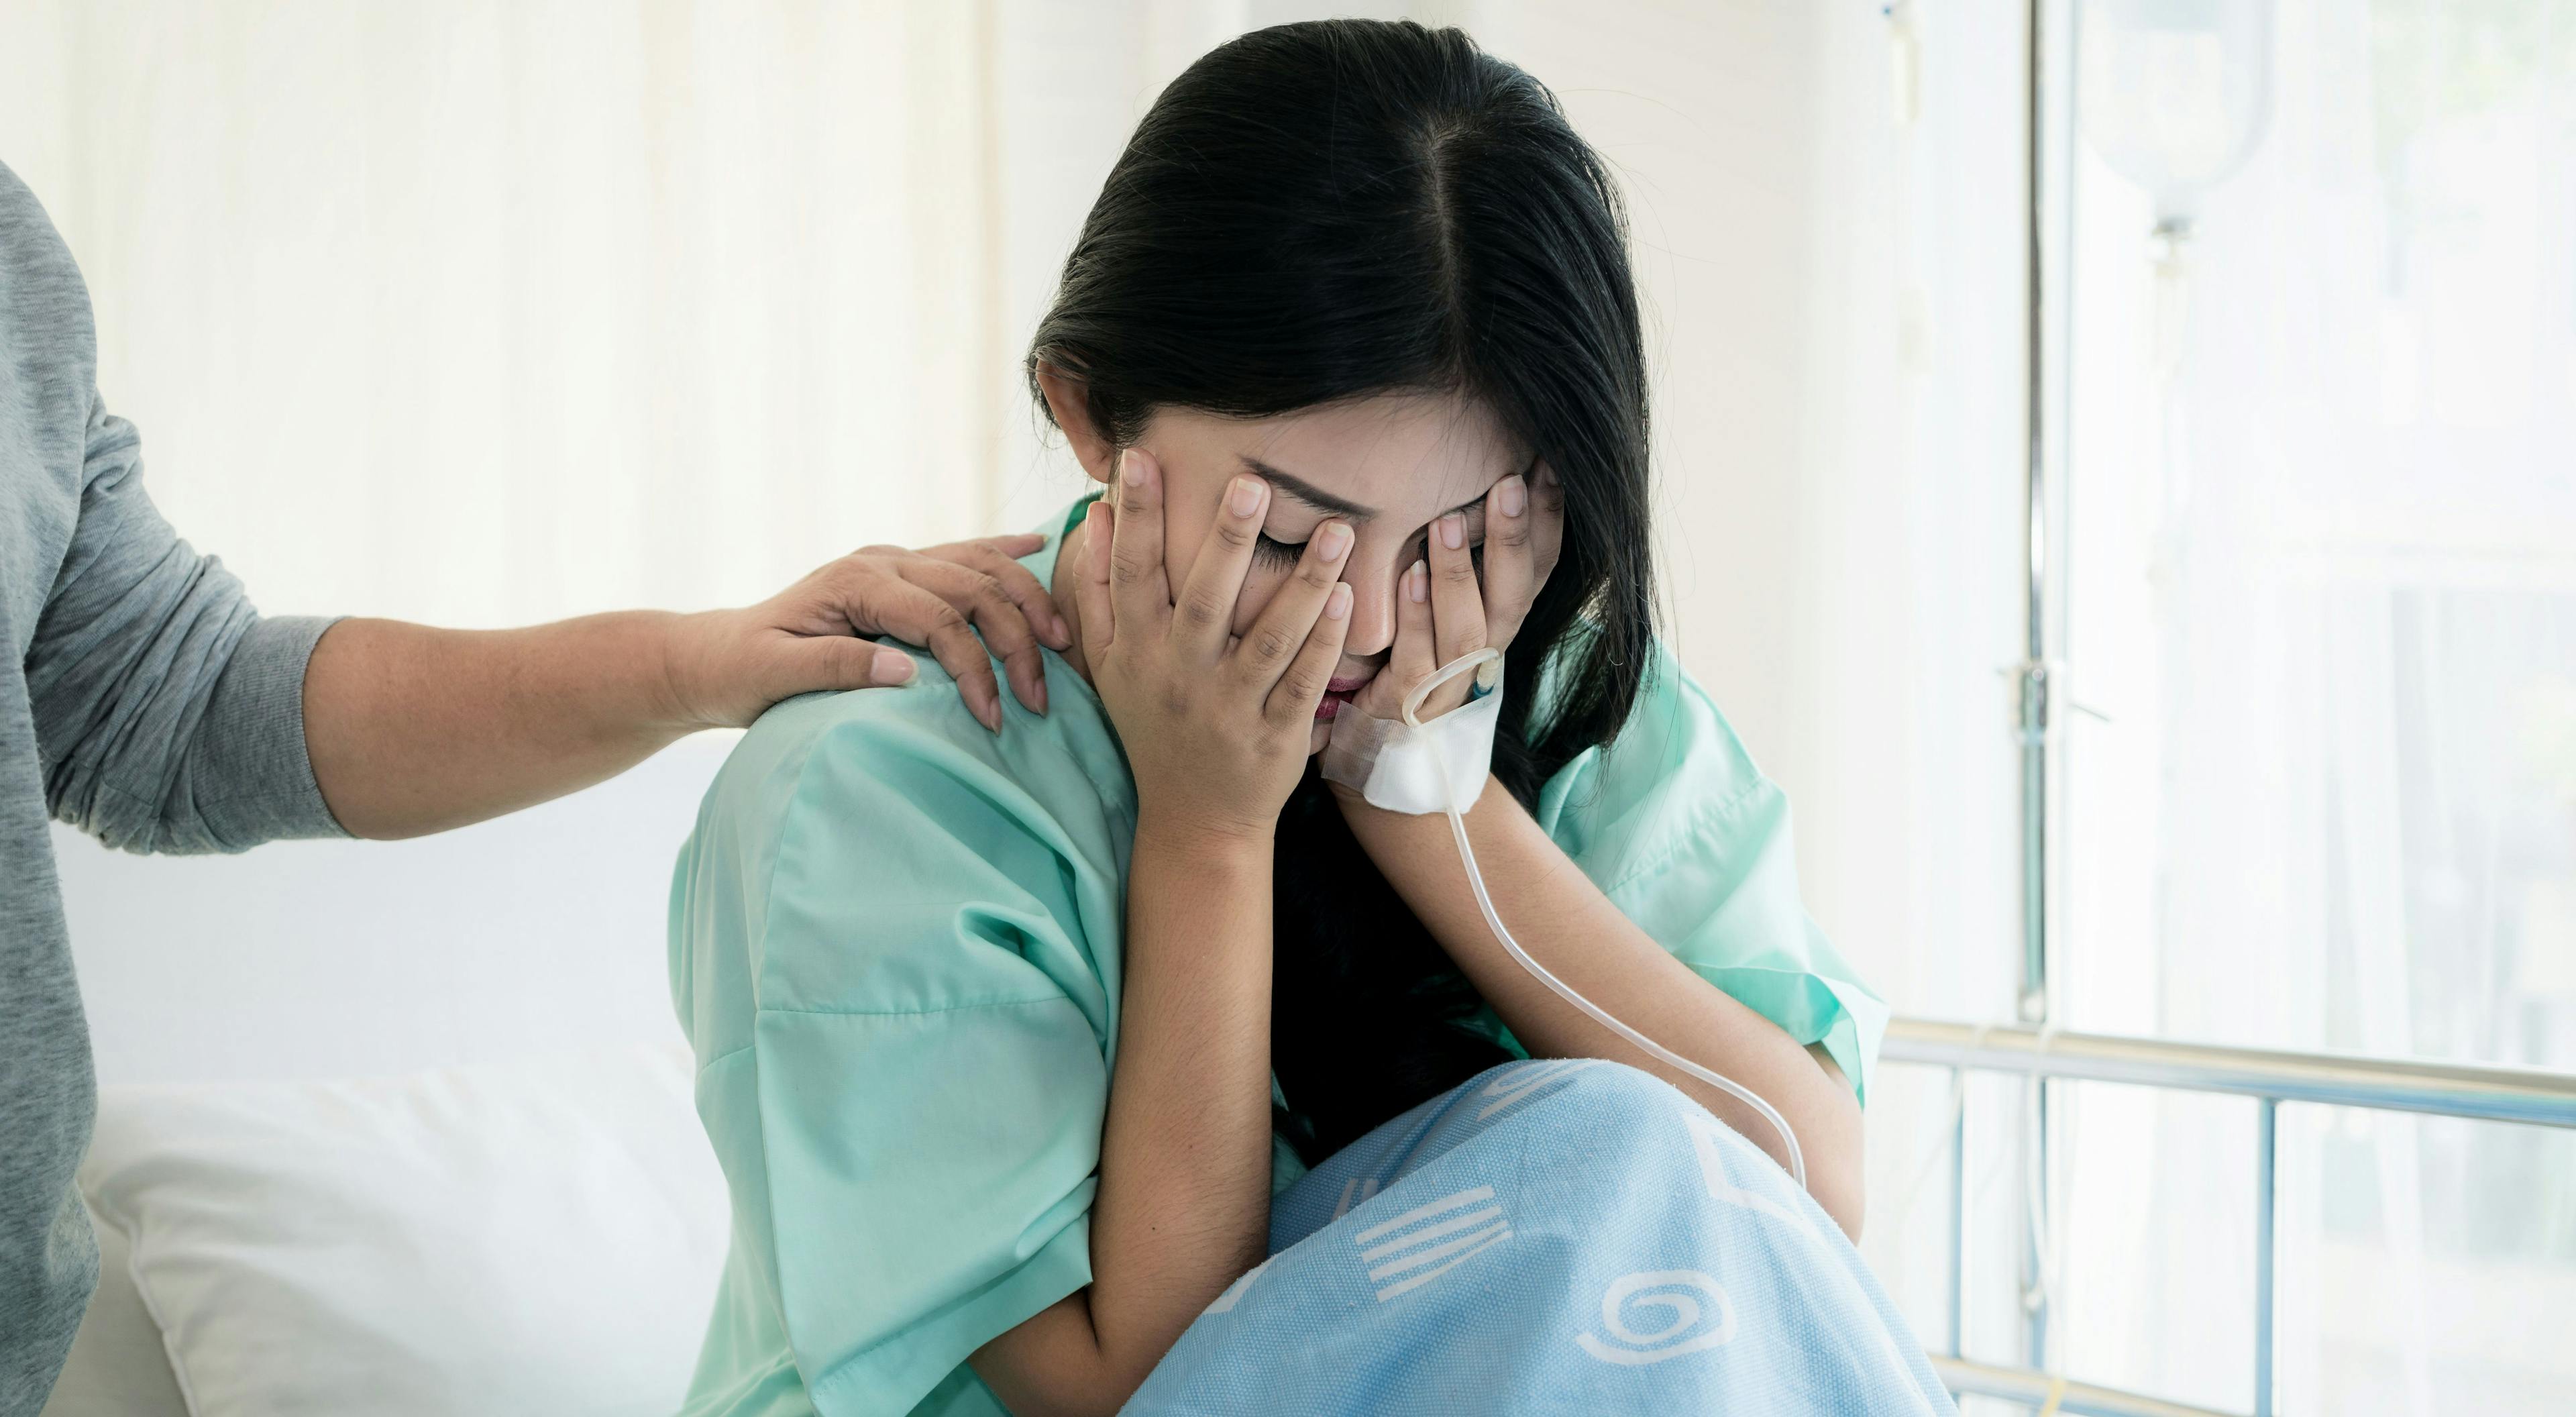 Nurses Should Discuss Patients' Mental Health Early On